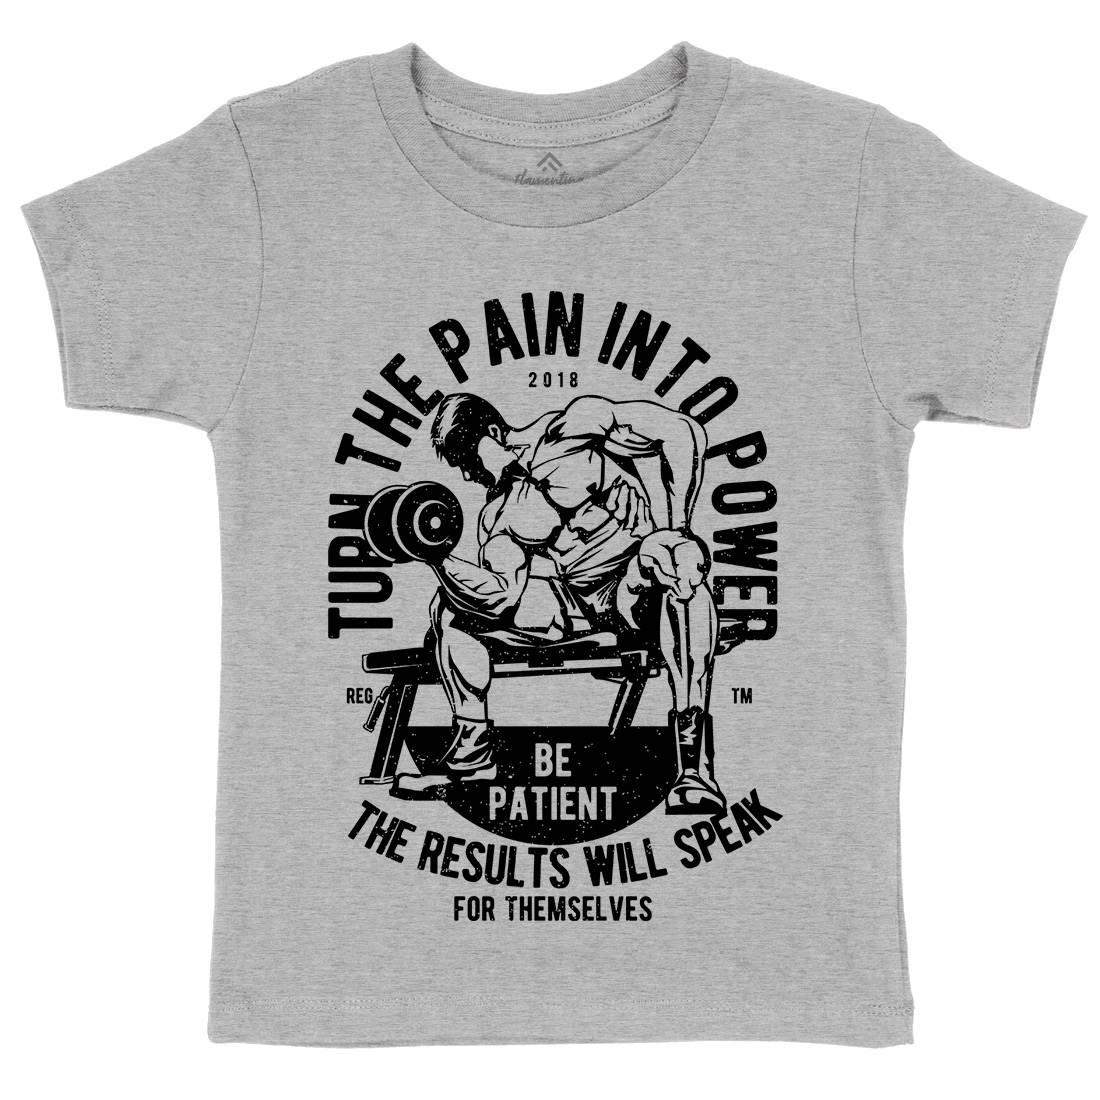 Turn The Pain Into Power Kids Organic Crew Neck T-Shirt Gym A780